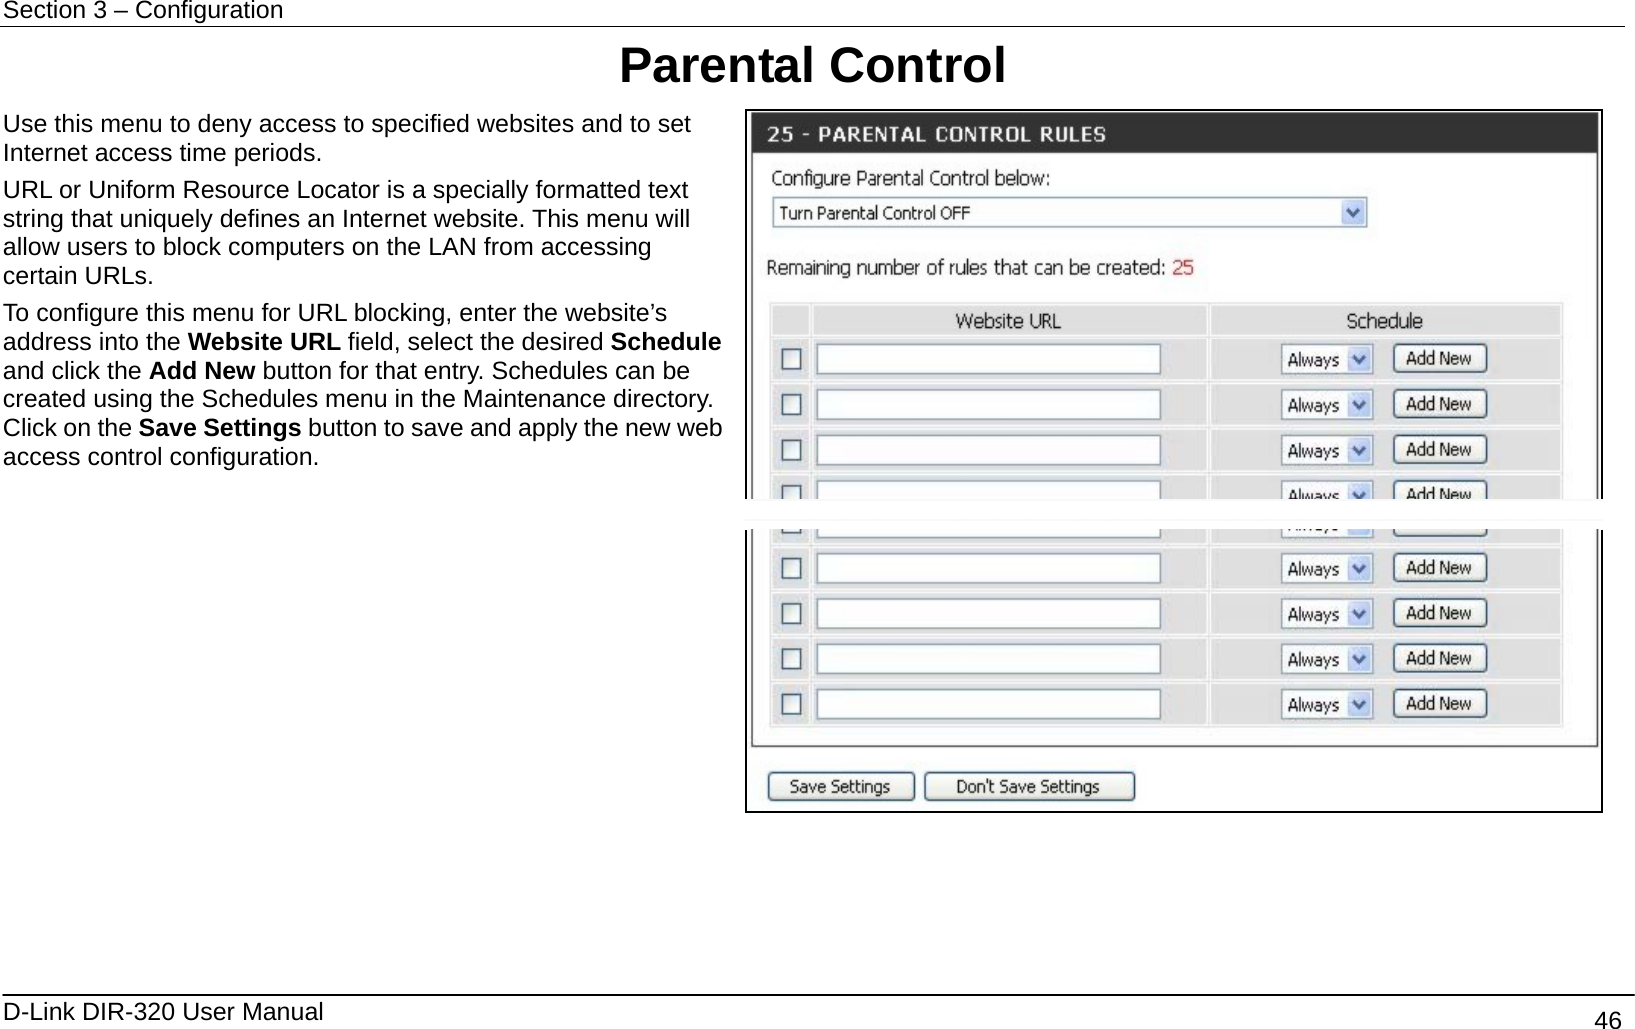 Section 3 – Configuration   D-Link DIR-320 User Manual                                       46 Parental Control Use this menu to deny access to specified websites and to set Internet access time periods. URL or Uniform Resource Locator is a specially formatted text string that uniquely defines an Internet website. This menu will allow users to block computers on the LAN from accessing certain URLs.   To configure this menu for URL blocking, enter the website’s address into the Website URL field, select the desired Schedule and click the Add New button for that entry. Schedules can be created using the Schedules menu in the Maintenance directory. Click on the Save Settings button to save and apply the new web access control configuration.       